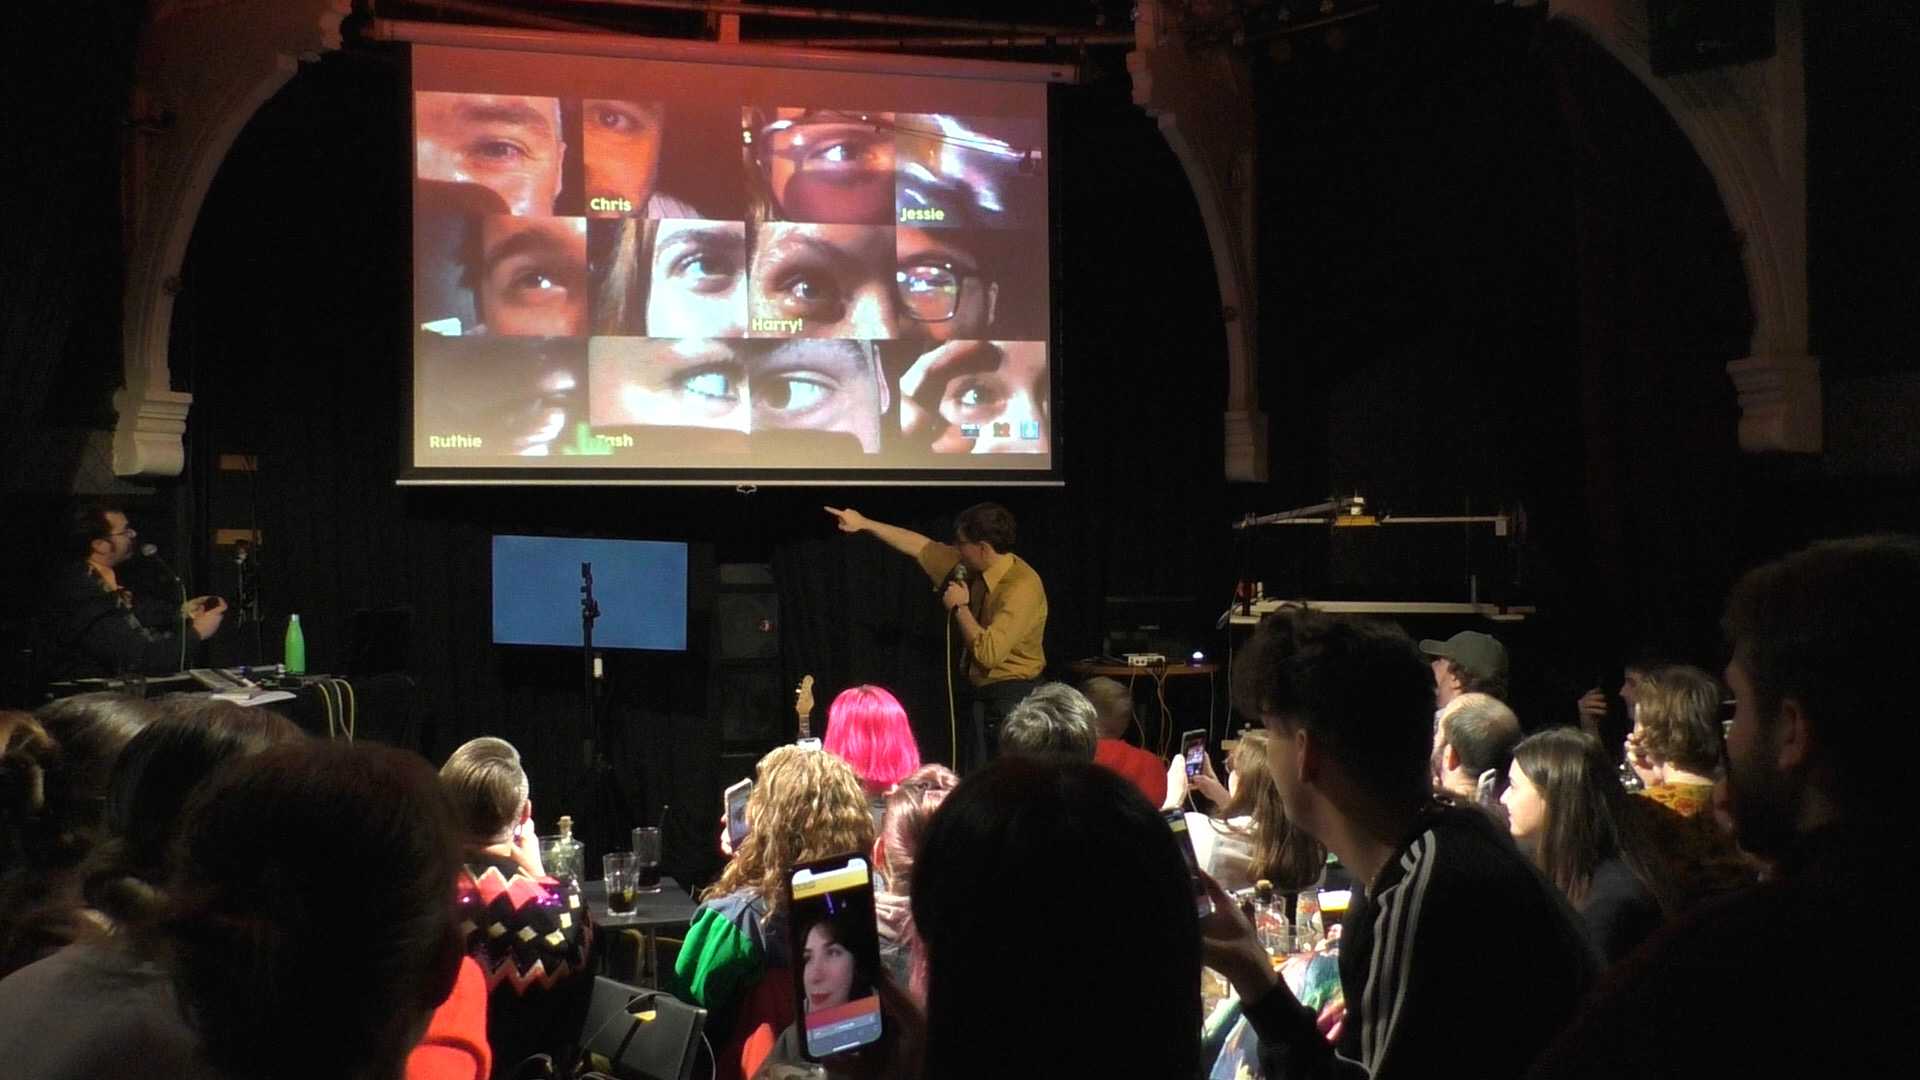 Audience phone cameras shown in a grid on a projector